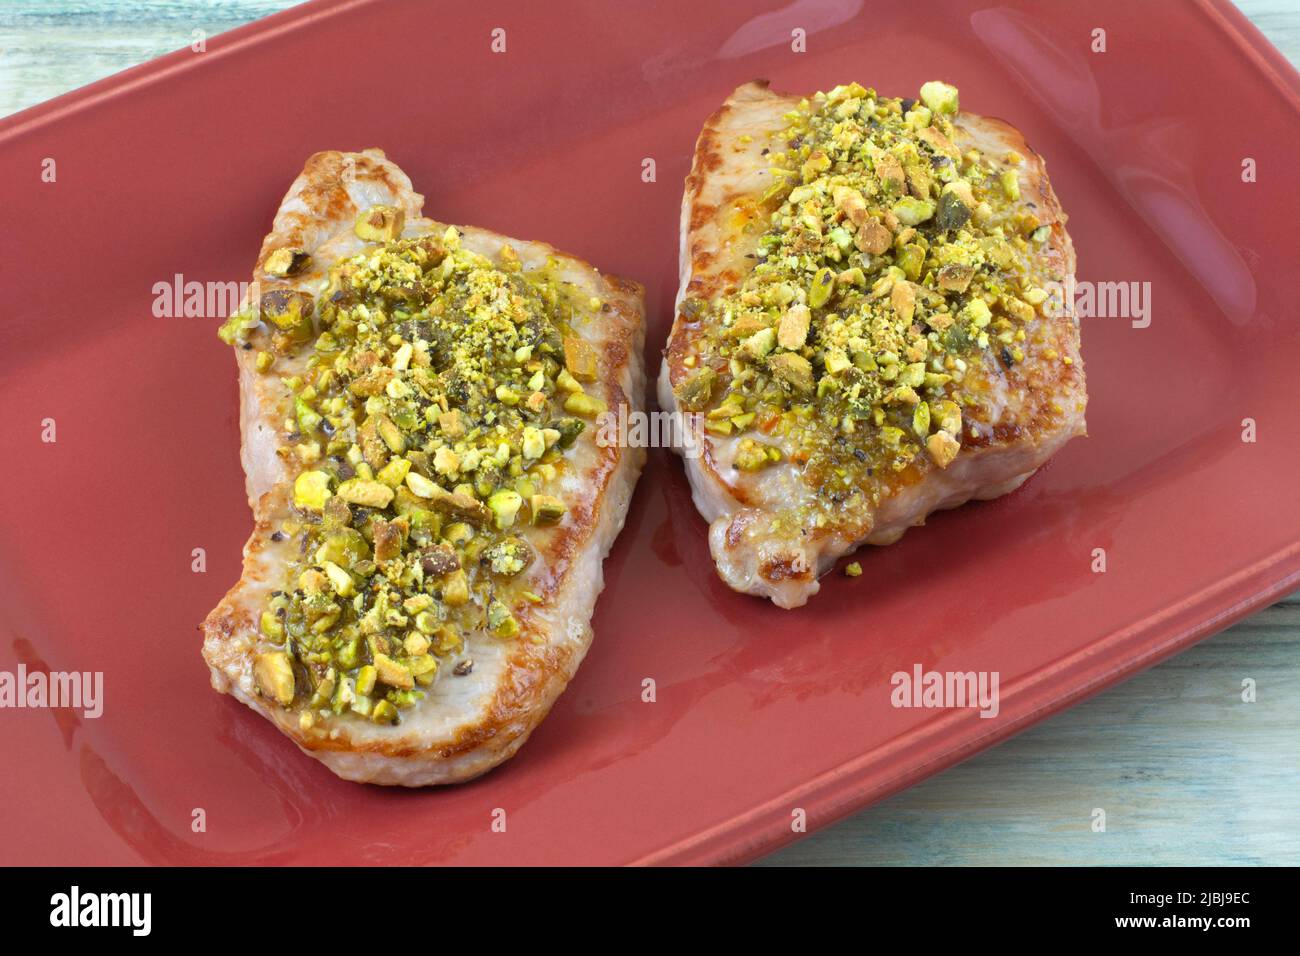 Two boneless pork chops with crushed pistachios on red serving plate Stock Photo